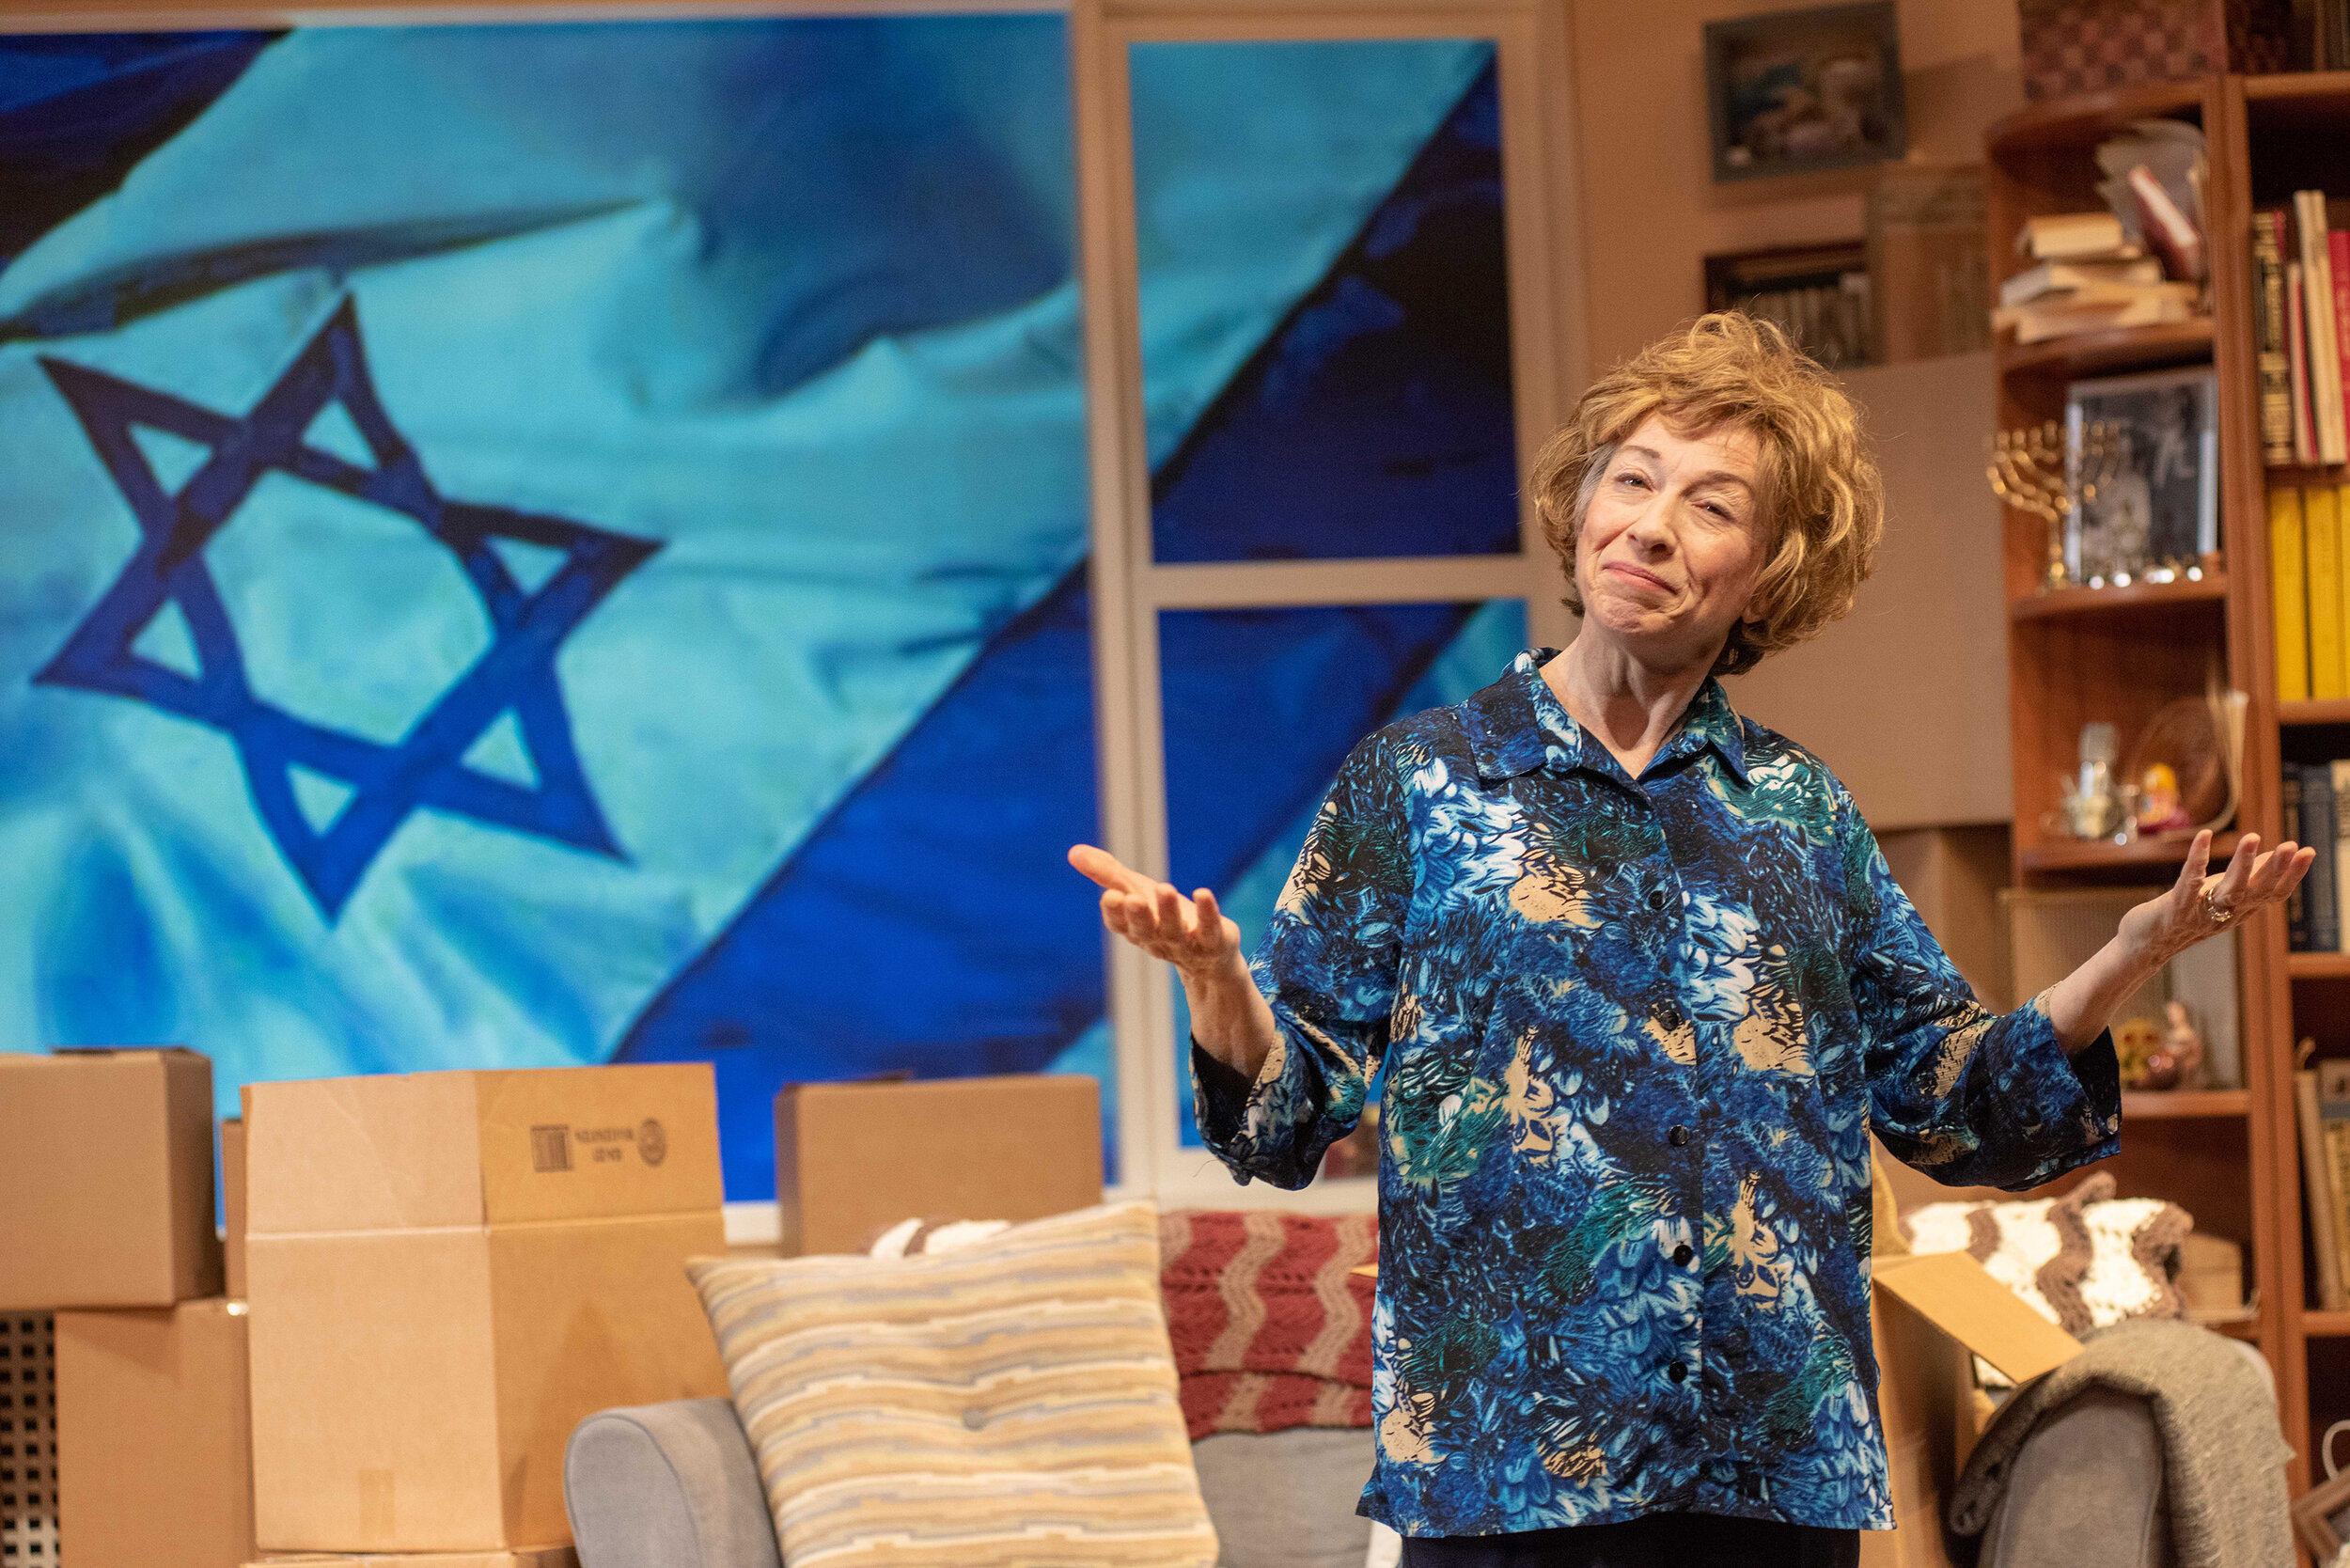 BECOMING DR. RUTH at NEW REPERTORY THEATRE